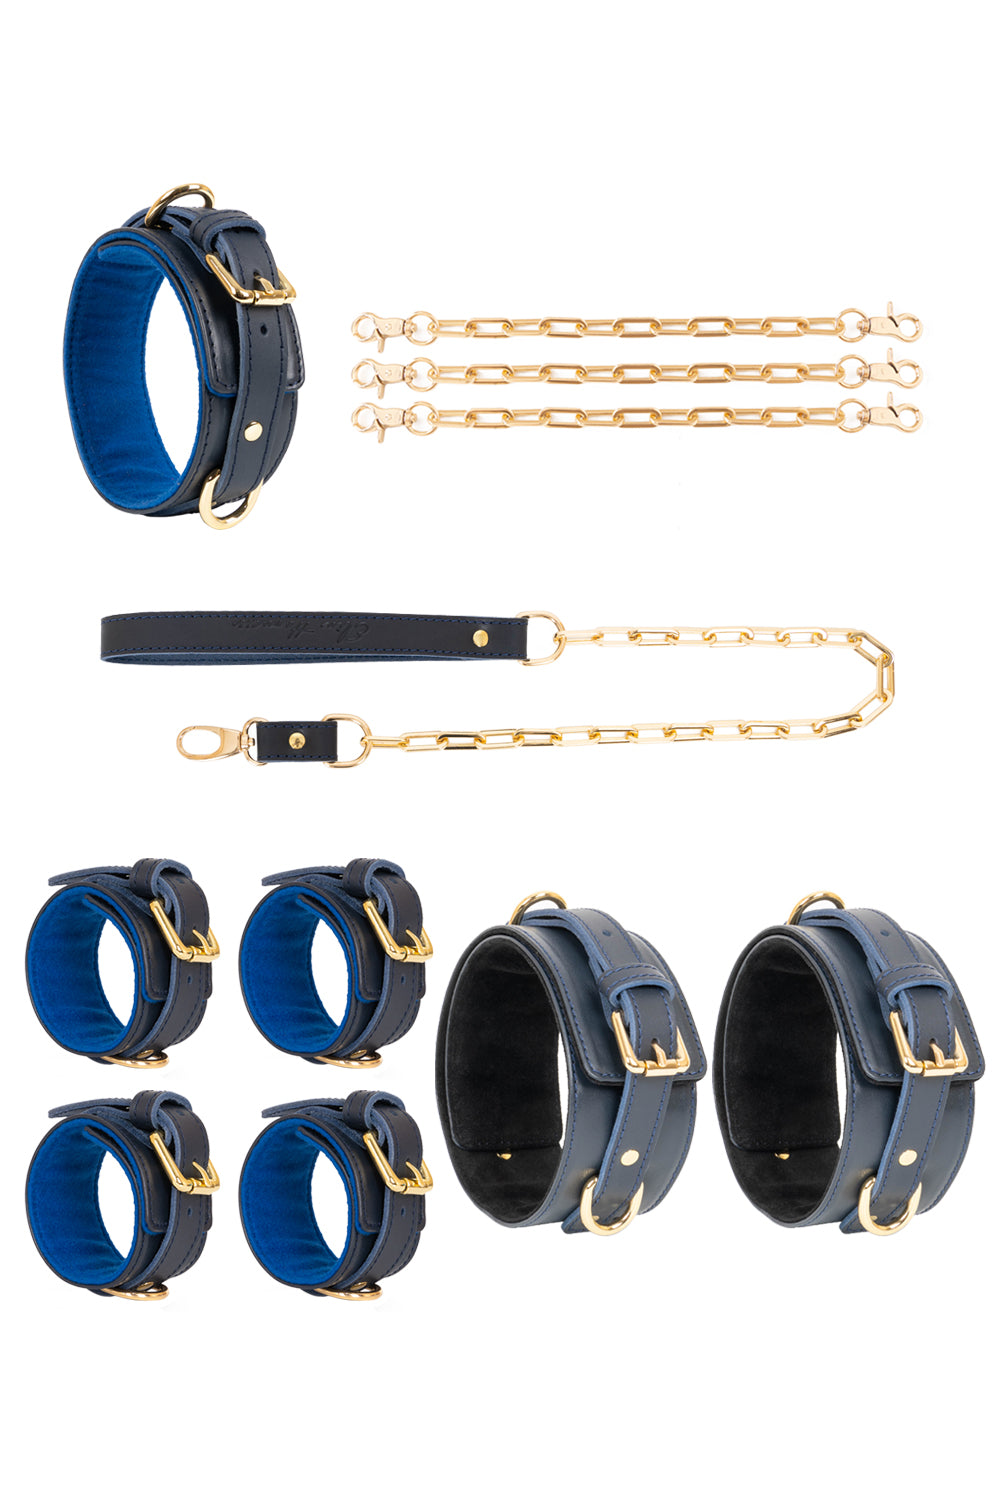 Leather set 4 in 1 with large links chain leash and connectors. 10 colors